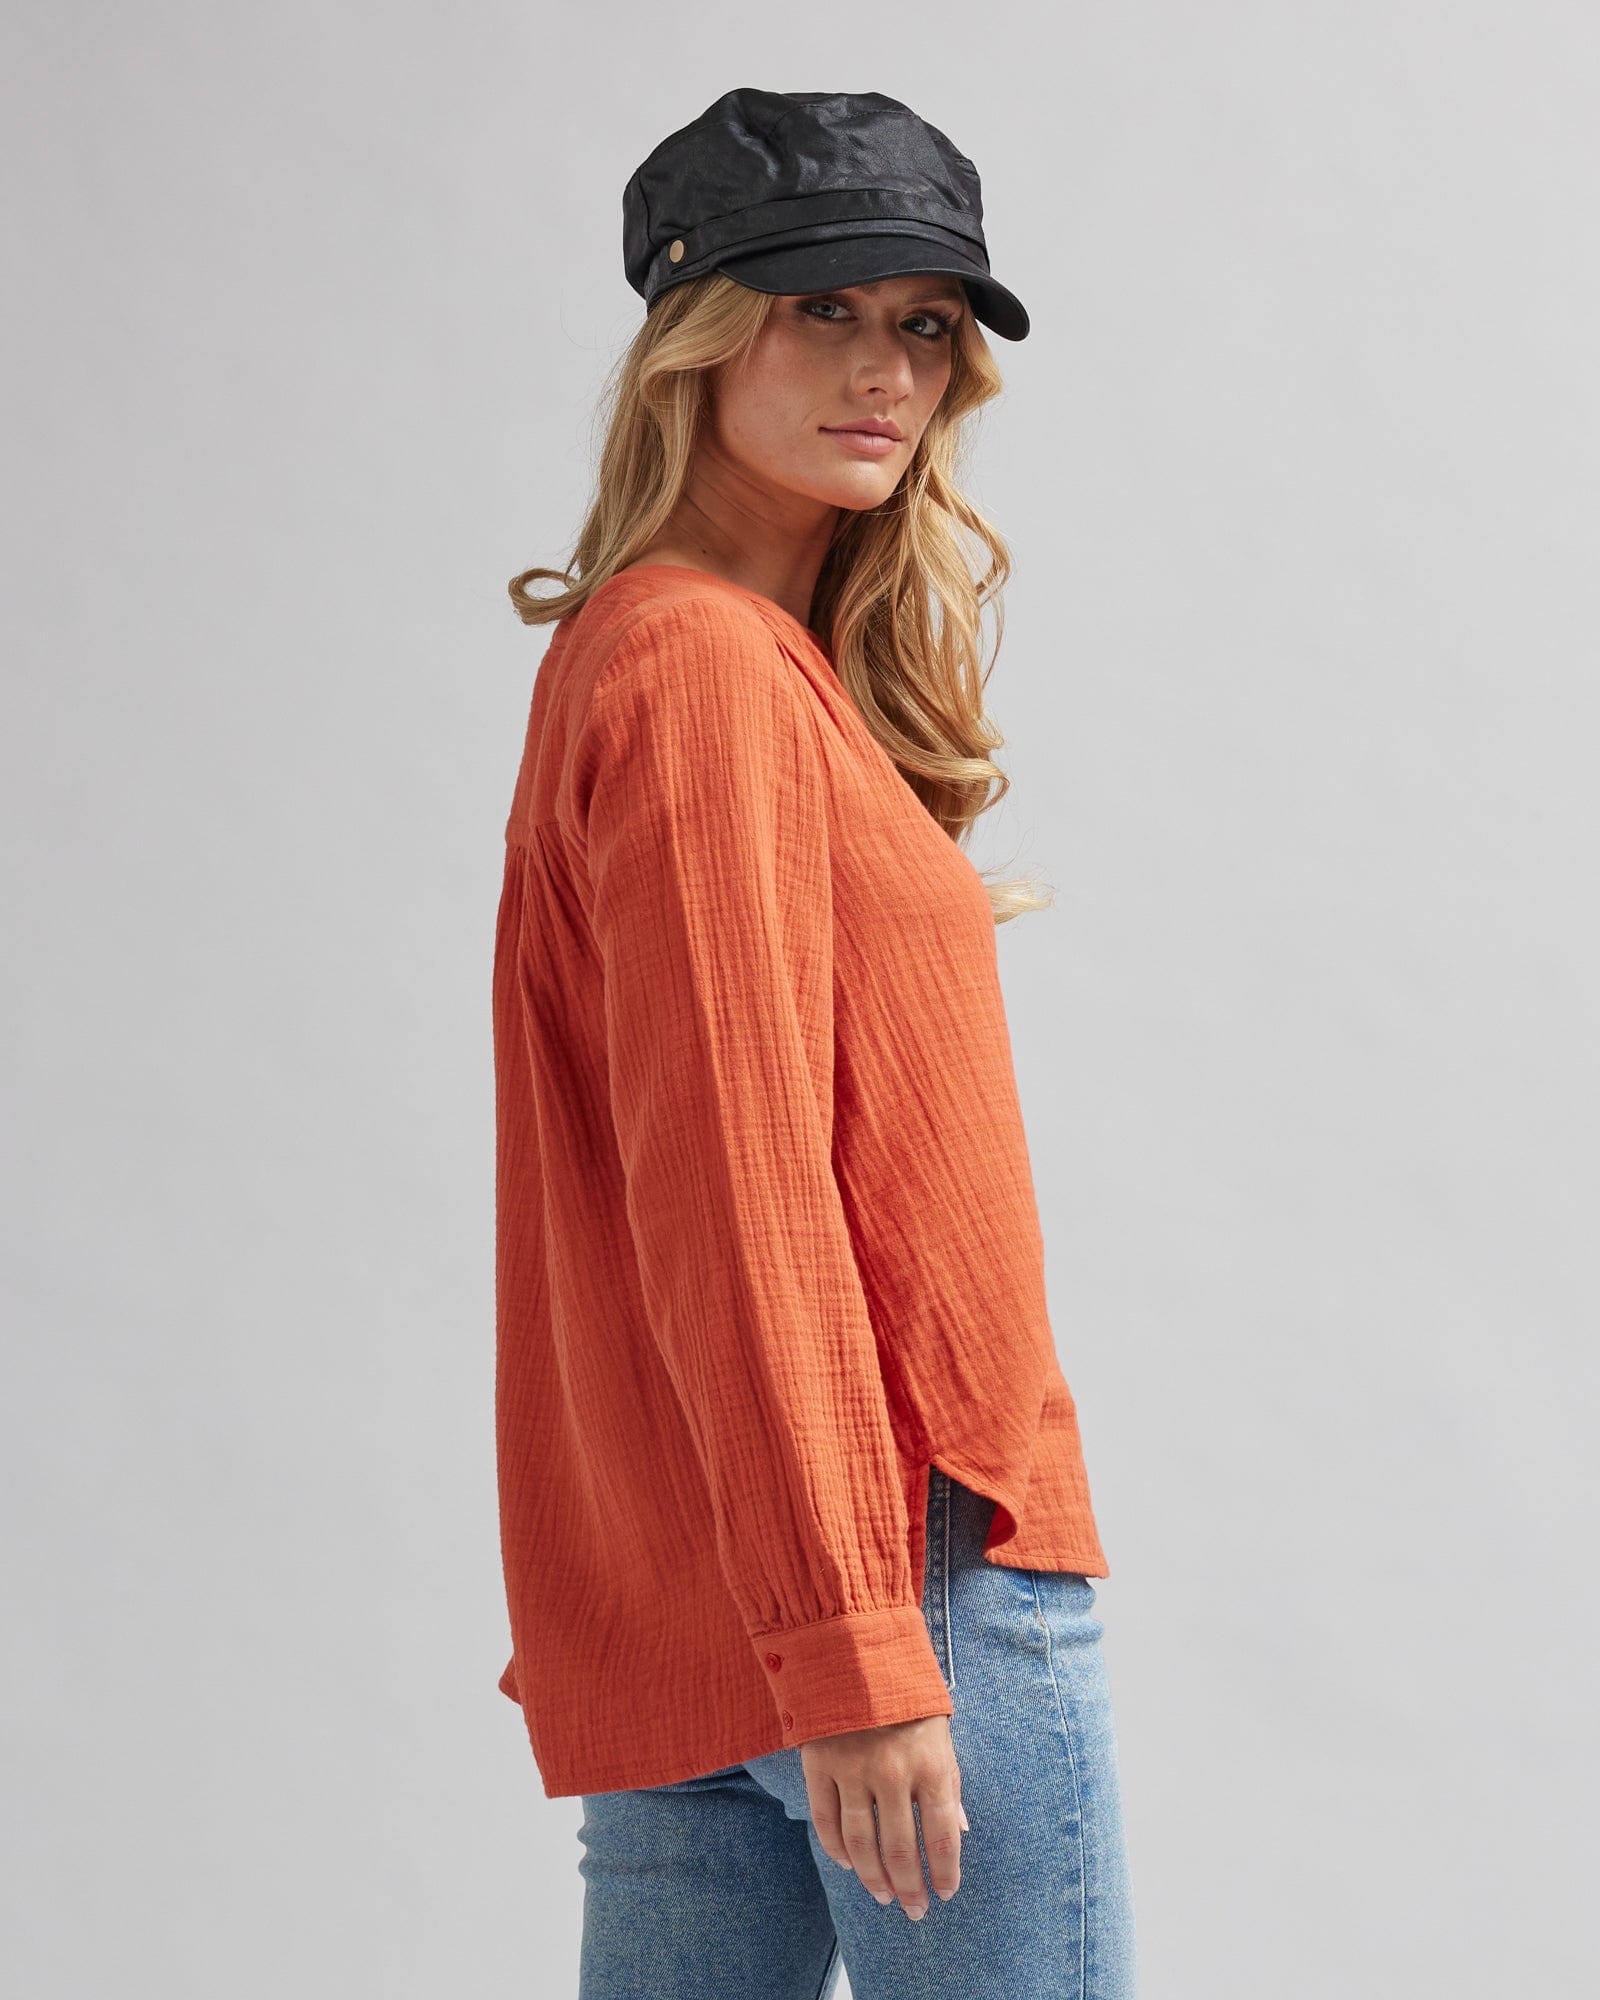 Woman in a long sleeve, orange, textured blouse